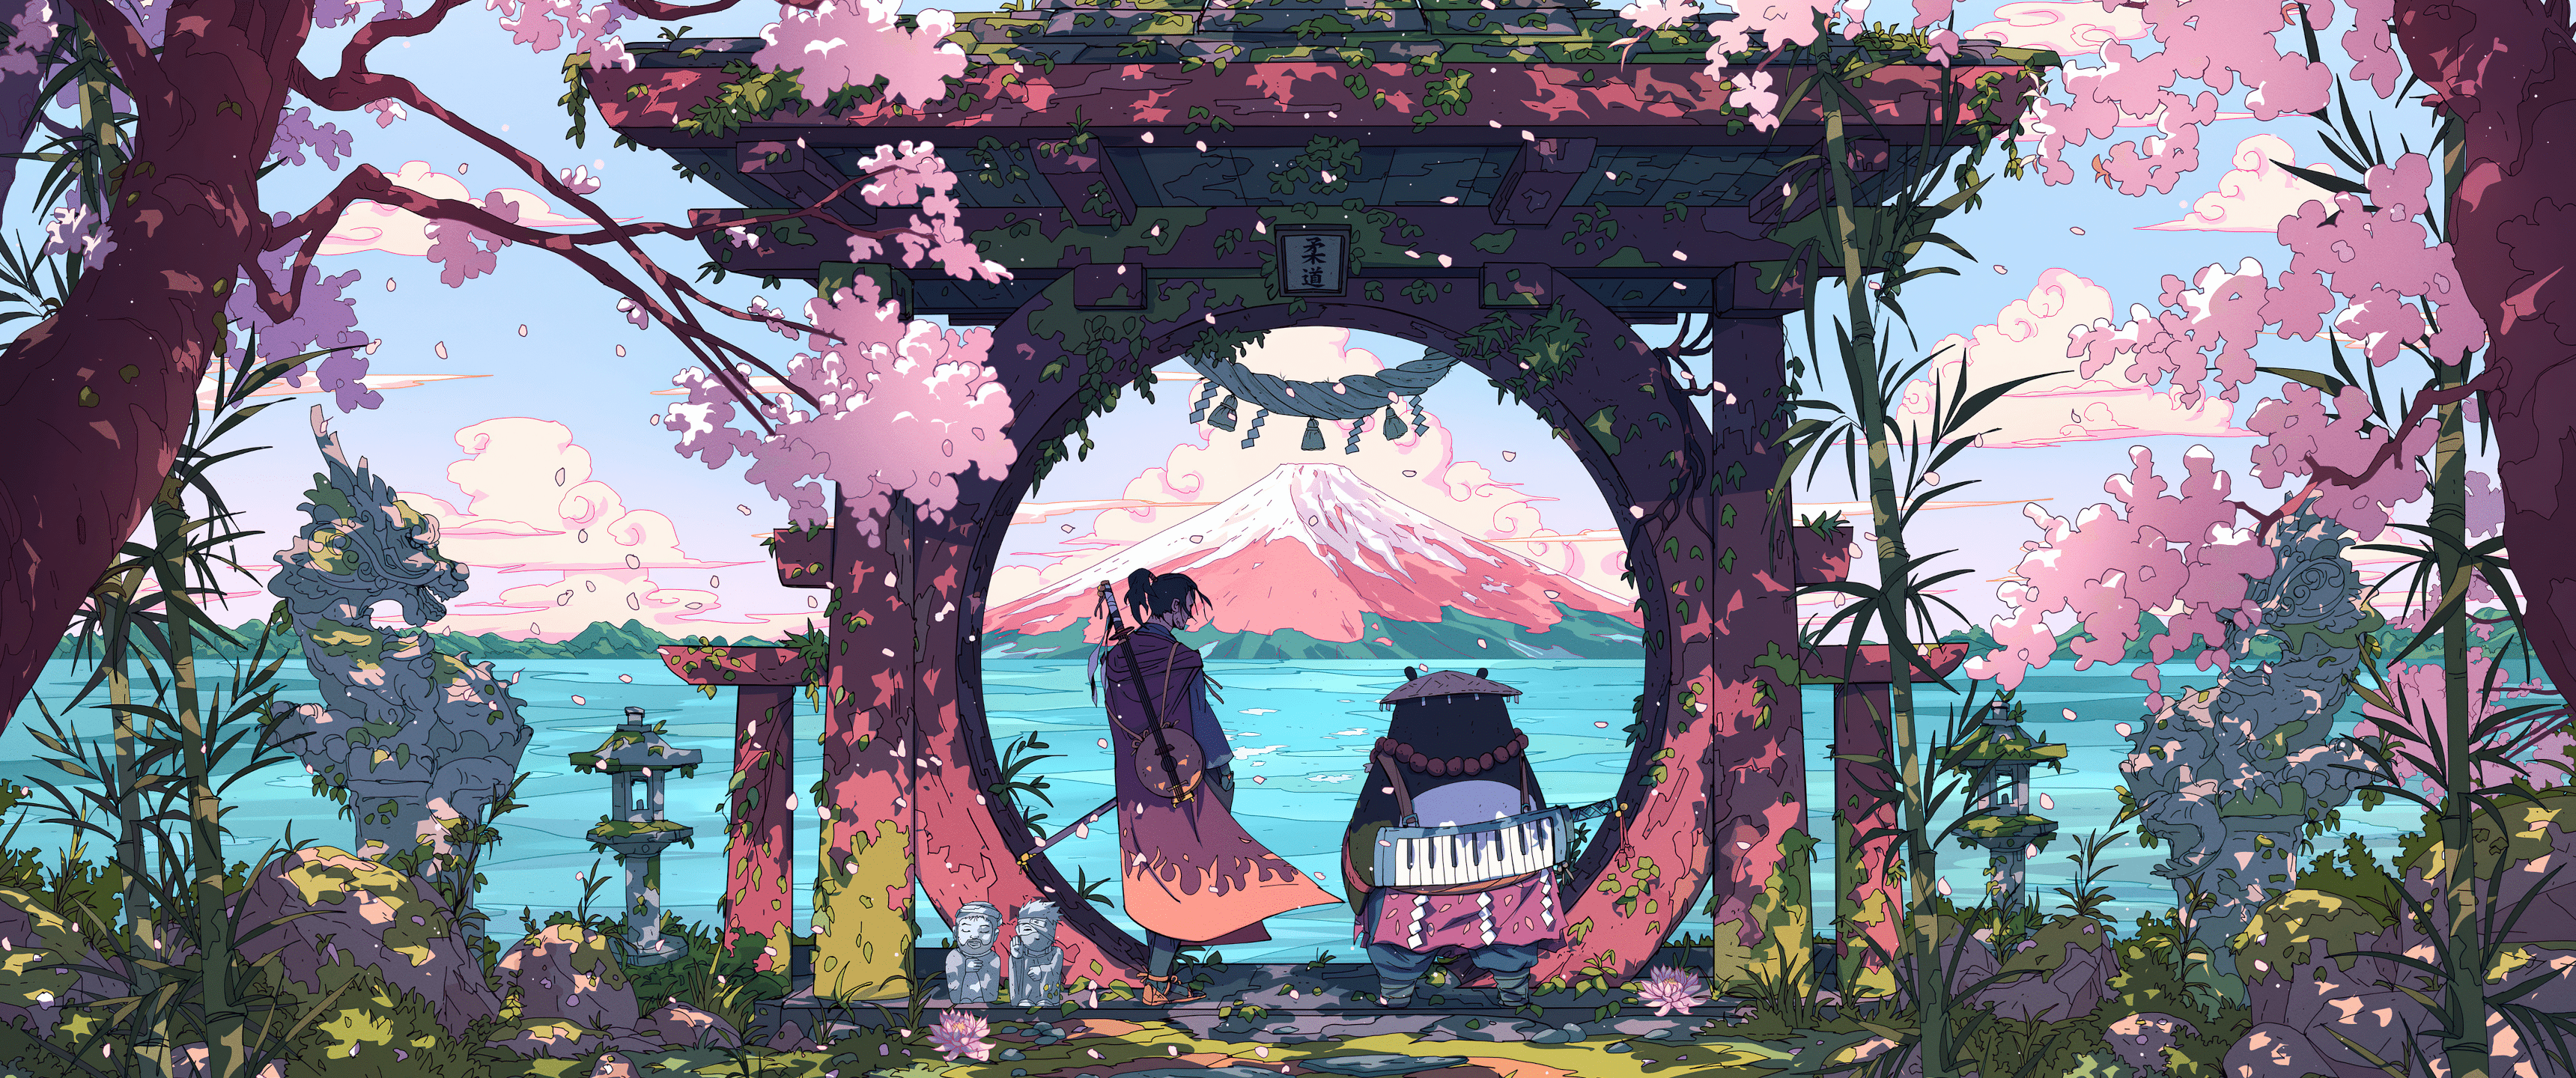 A painting of two people in front an archway with cherry blossoms - 3440x1440